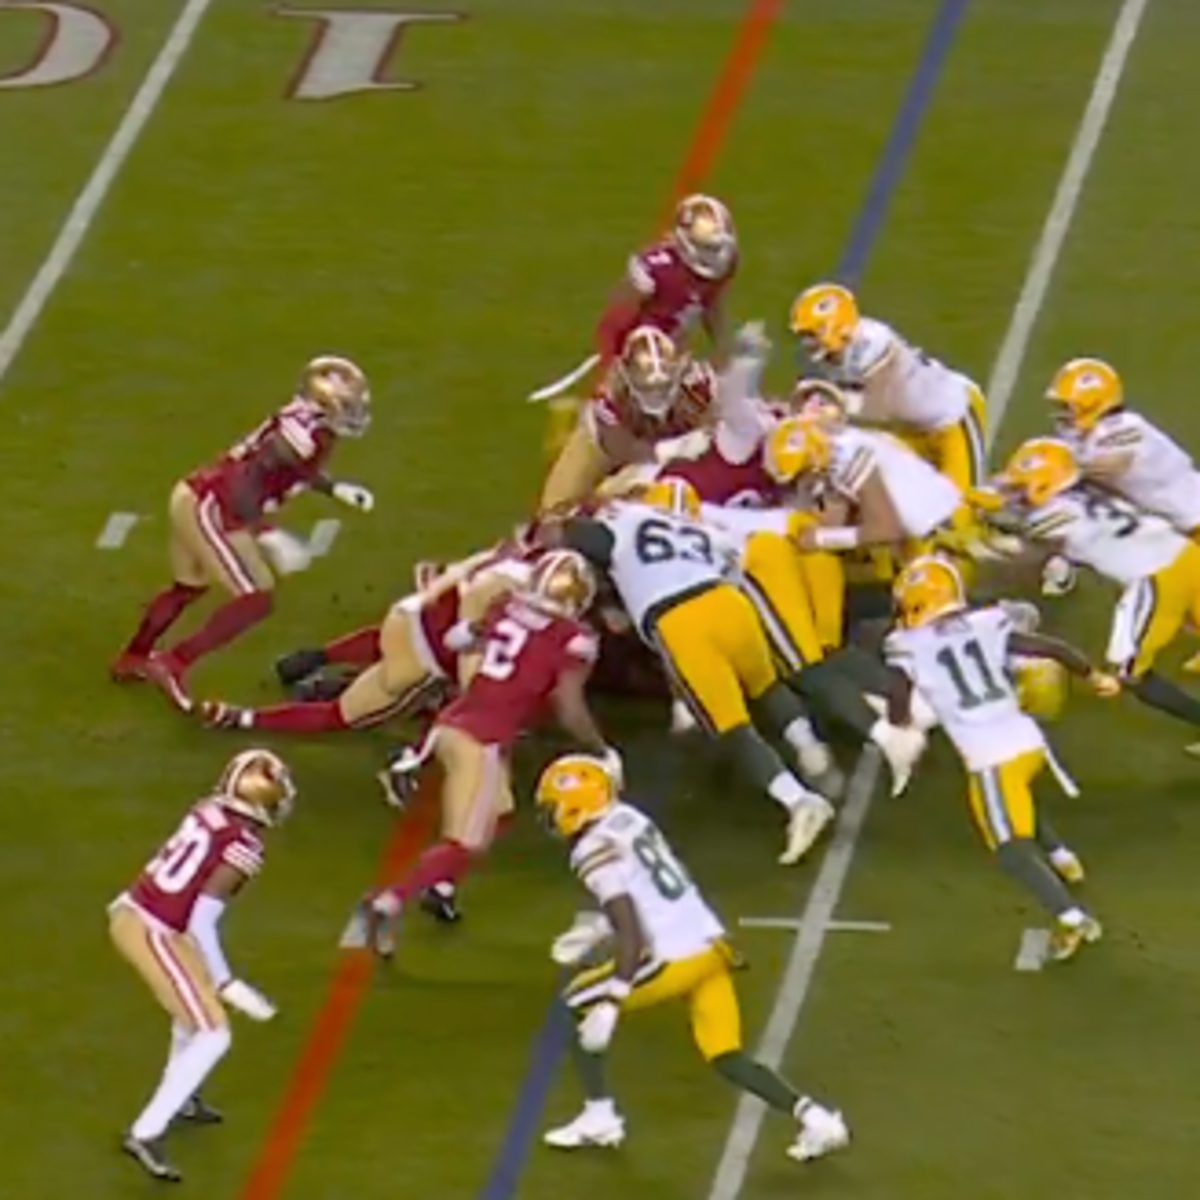 NFL Fans Furious With 'Awful' 4th-Down Spot in Packers-49ers Game